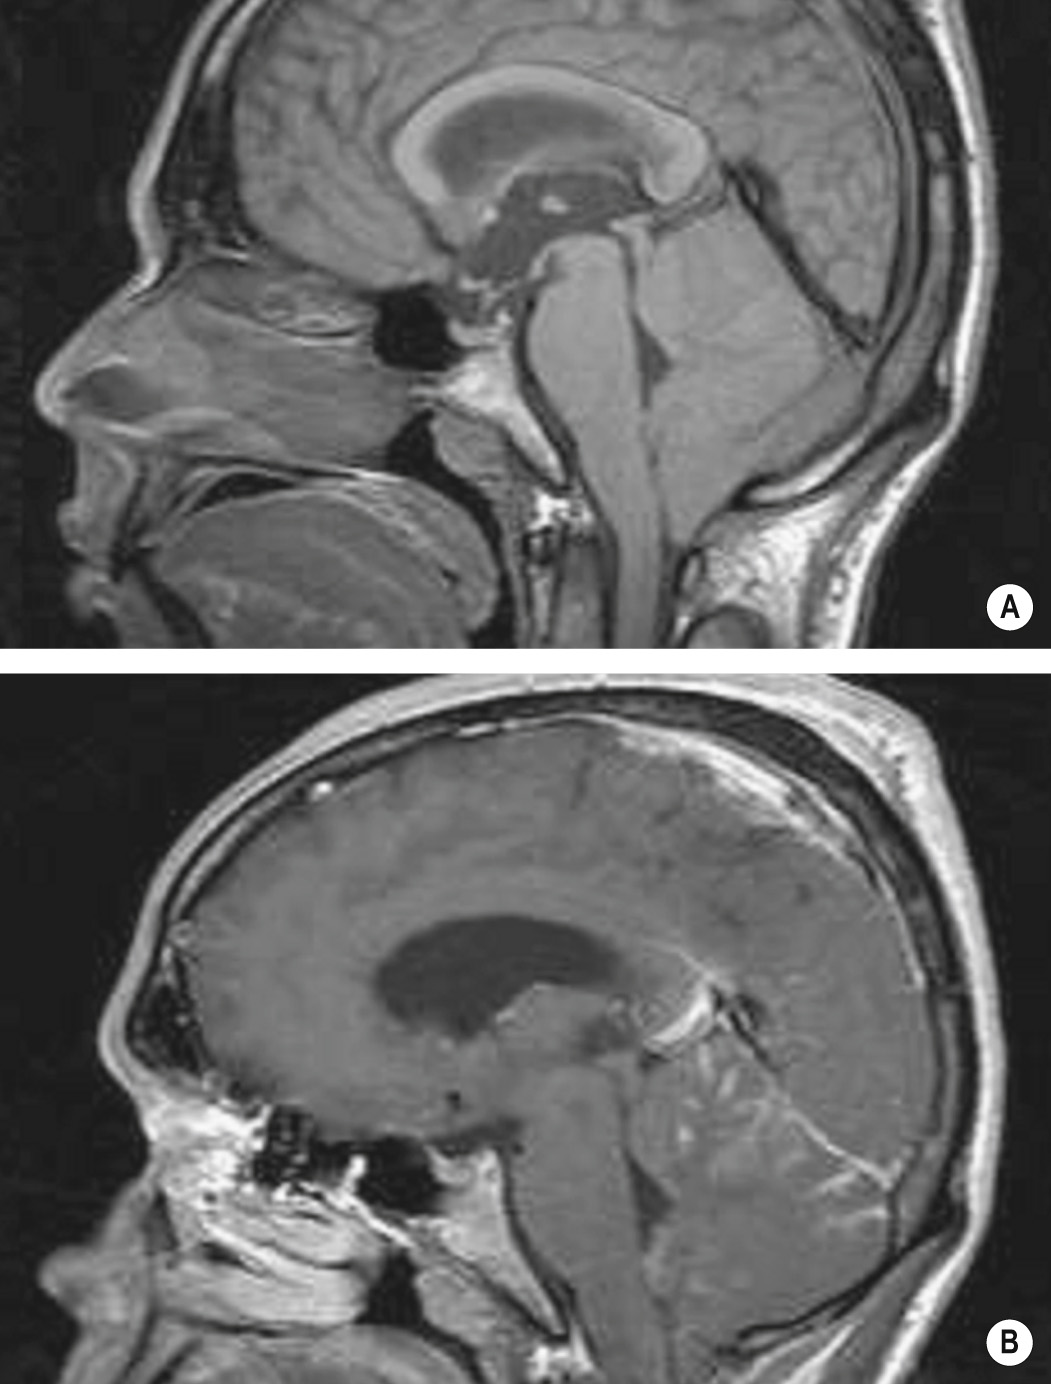 Tonsillar herniation (A) Sagittal T1WI shows pegged appearance of cerebellar tonsils through foramen magnum simulating a Chiari I malformation. (B) T1WI + Gad shows cerebellar leptomeningeal enhancement due to cryptococcal menginoencephalitis in this patient with AIDS. ++